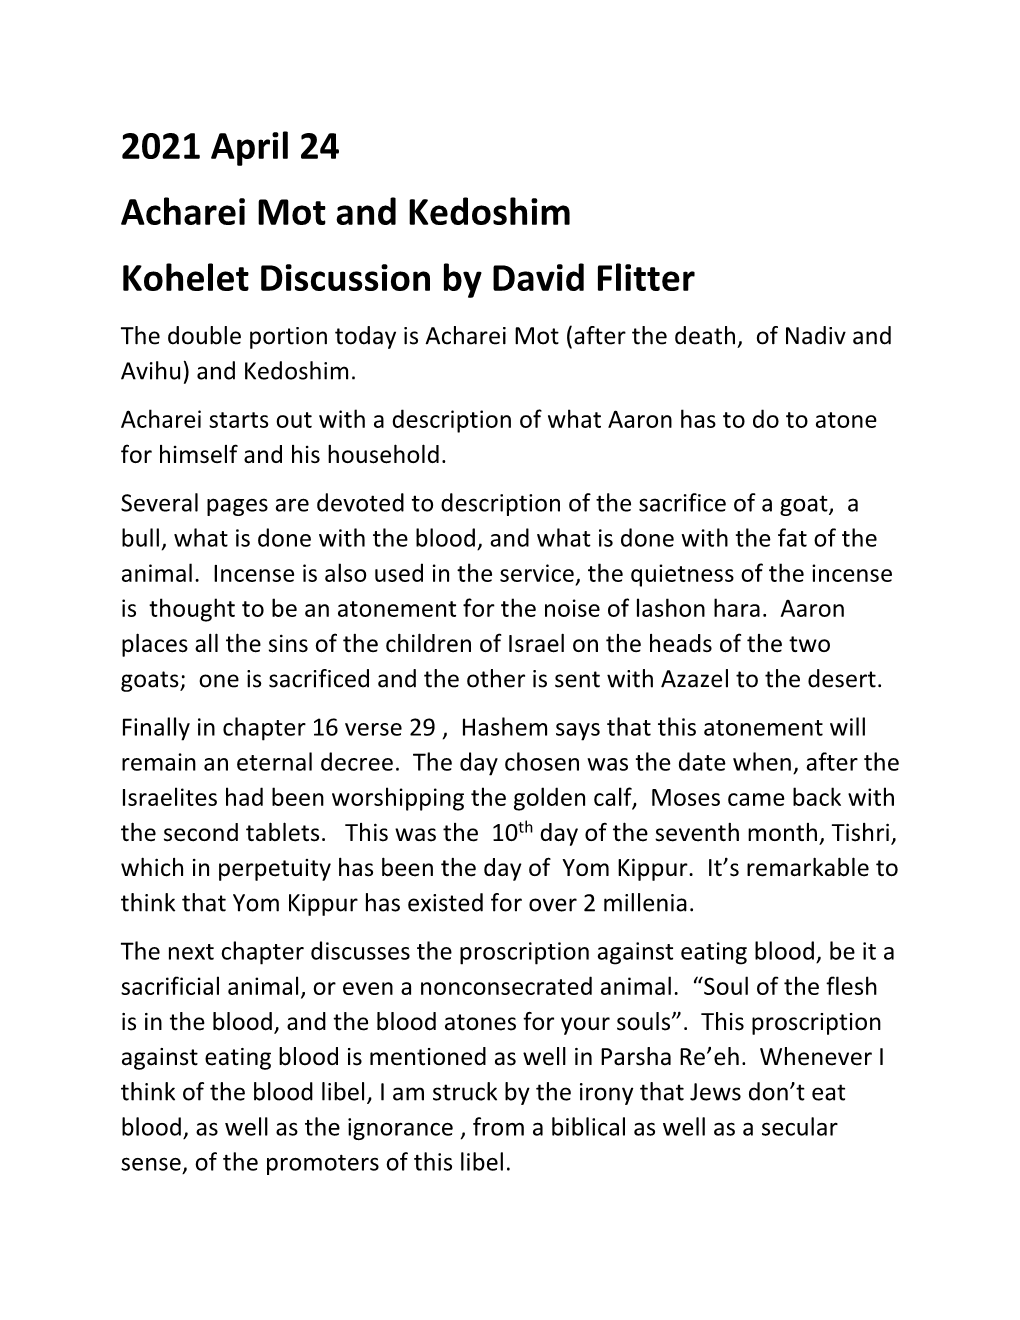 2021 April 24 Acharei Mot and Kedoshim Kohelet Discussion by David Flitter the Double Portion Today Is Acharei Mot (After the Death, of Nadiv and Avihu) and Kedoshim